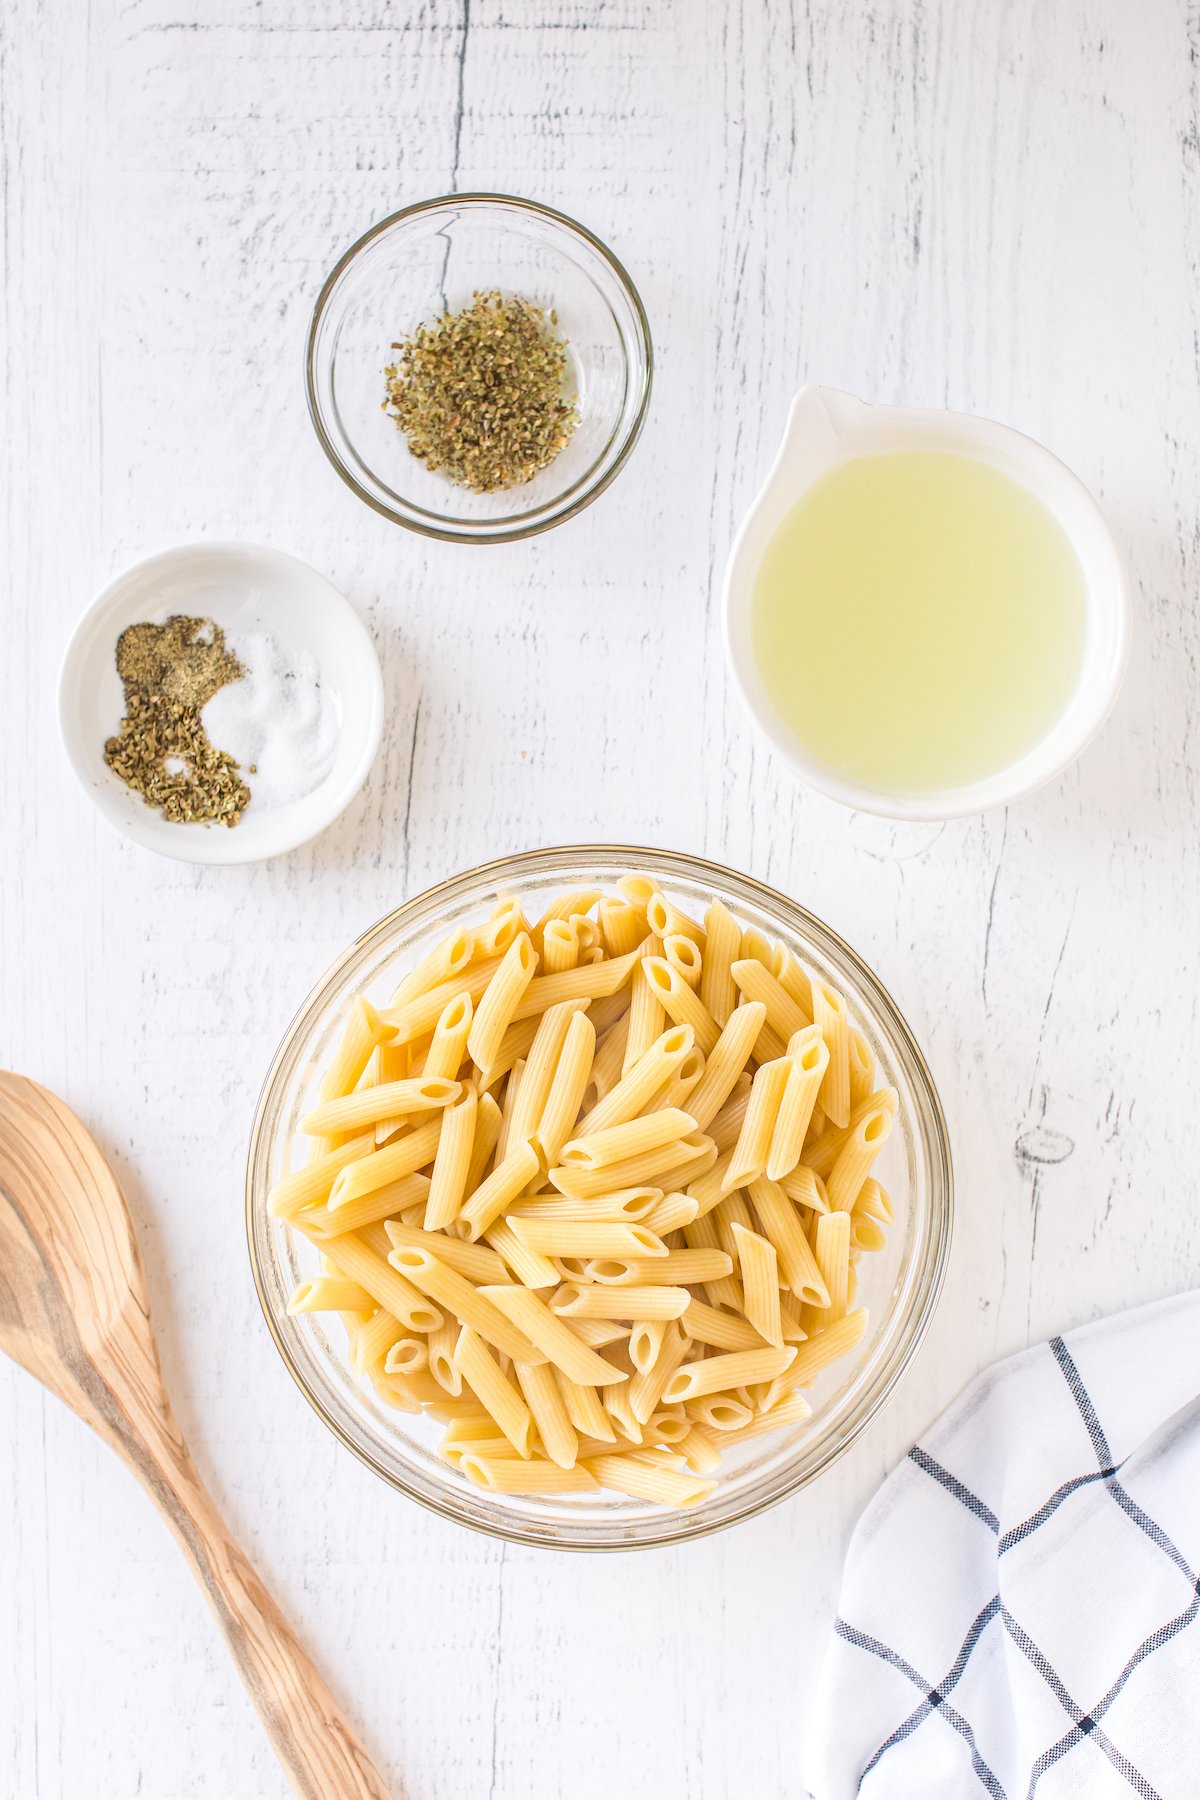 Bowl of pasta with herbs and olive oil.